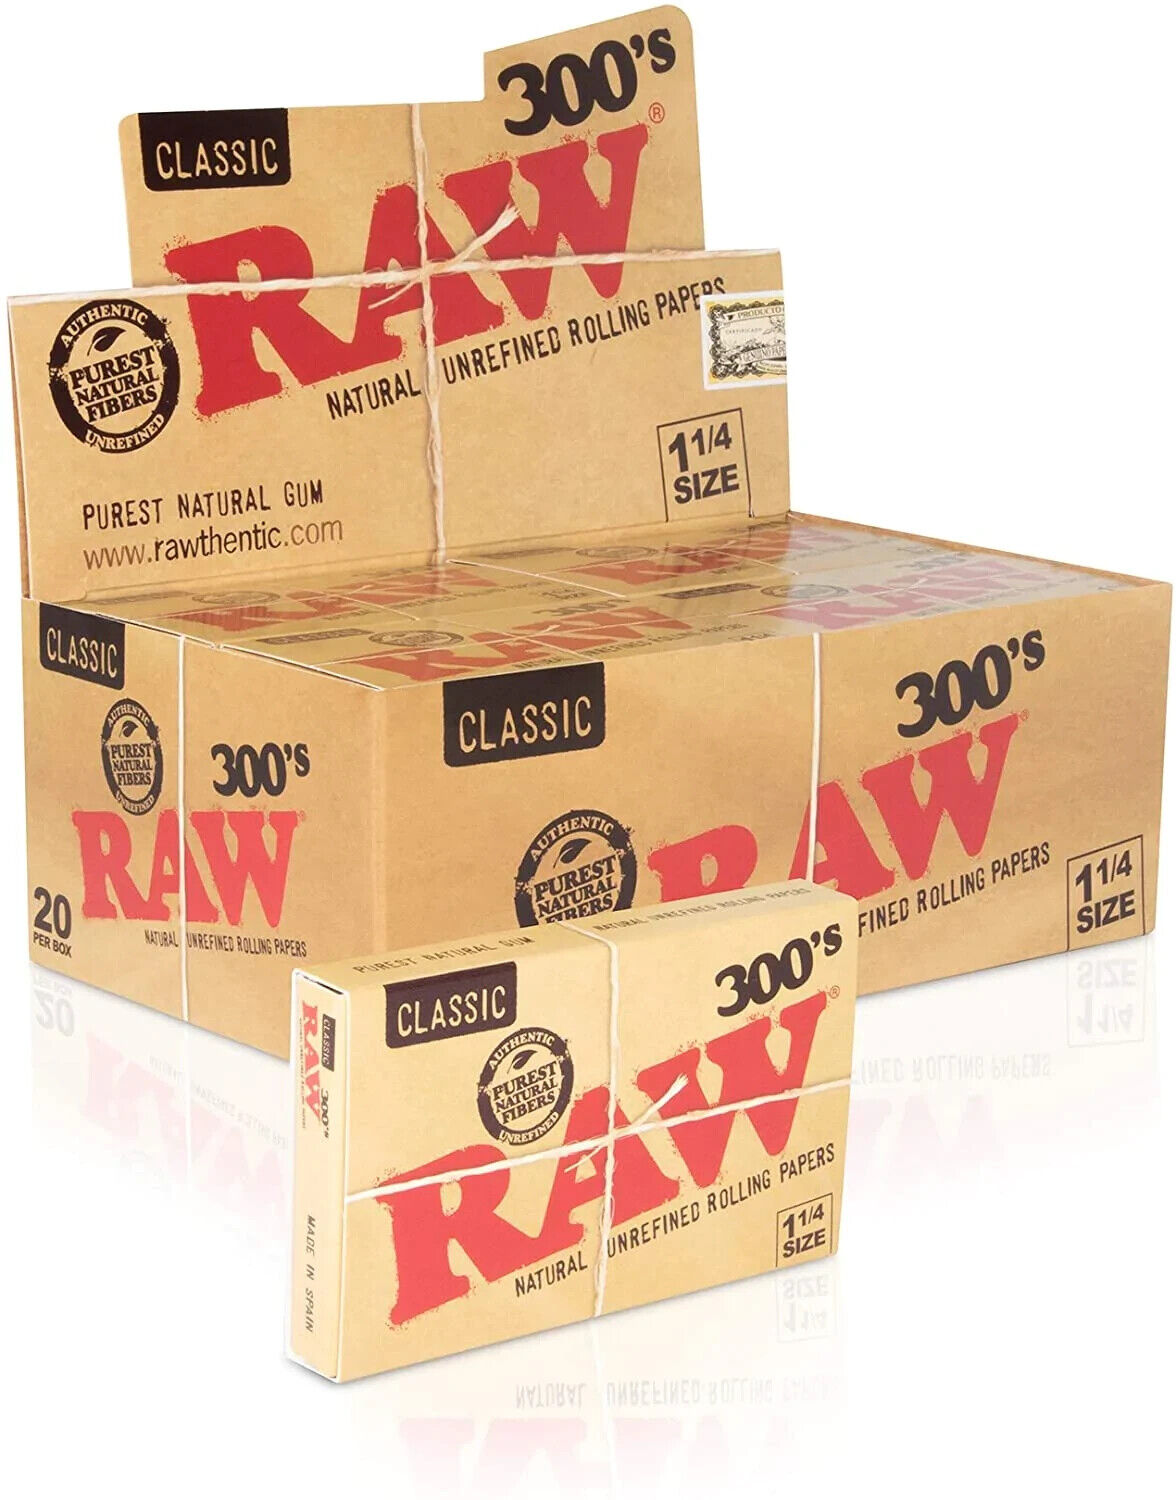 😎RAW 300's CLASSIC NATURAL UNREFINED ROLLING PAPERS FULL BOX 1 1/4 -✨ 20 Packs✨